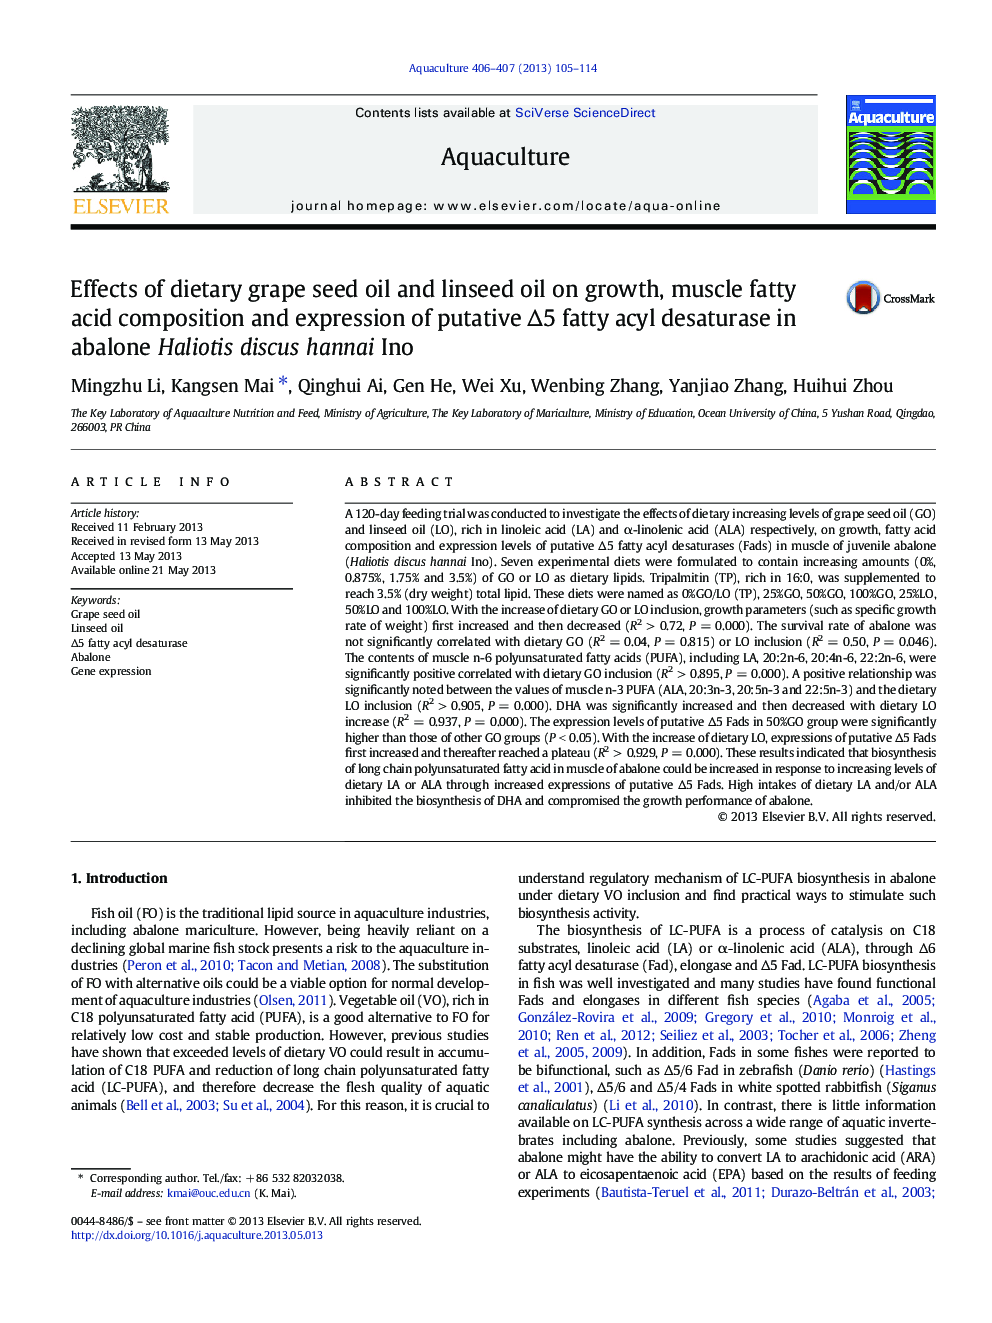 Effects of dietary grape seed oil and linseed oil on growth, muscle fatty acid composition and expression of putative Î5 fatty acyl desaturase in abalone Haliotis discus hannai Ino